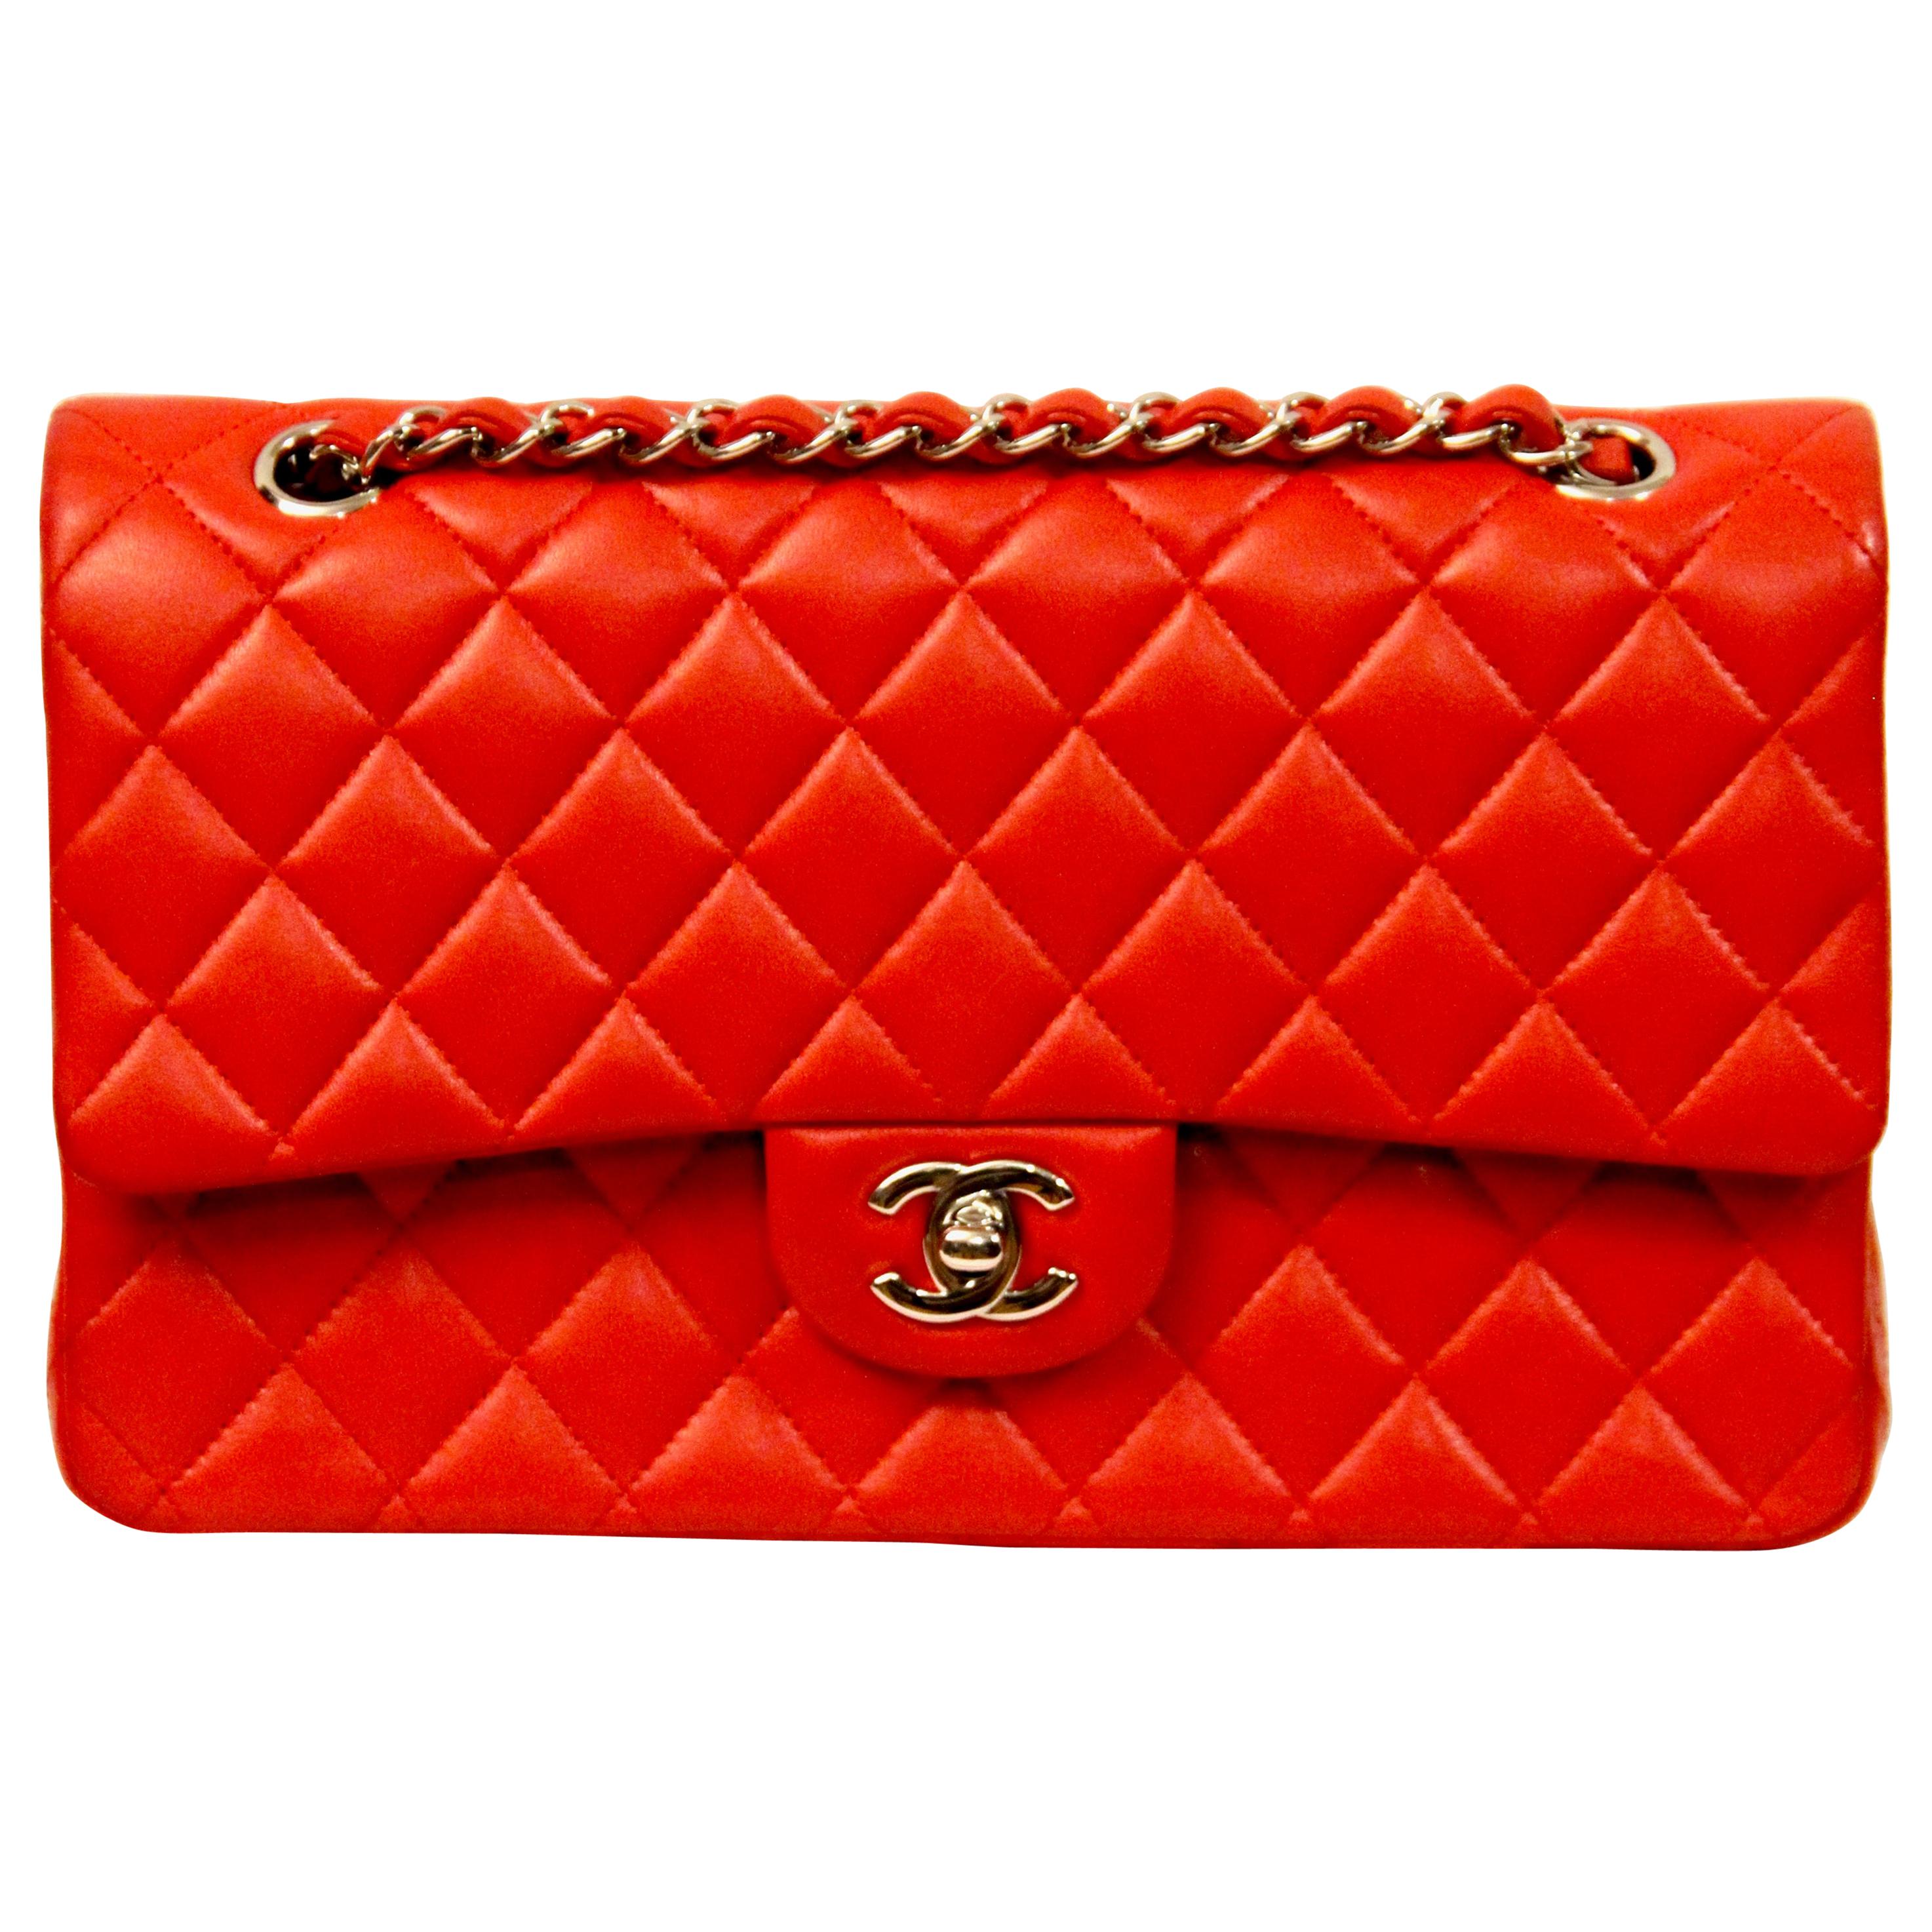 Chanel Classic Double Flap Red Lambskin Leather Bag